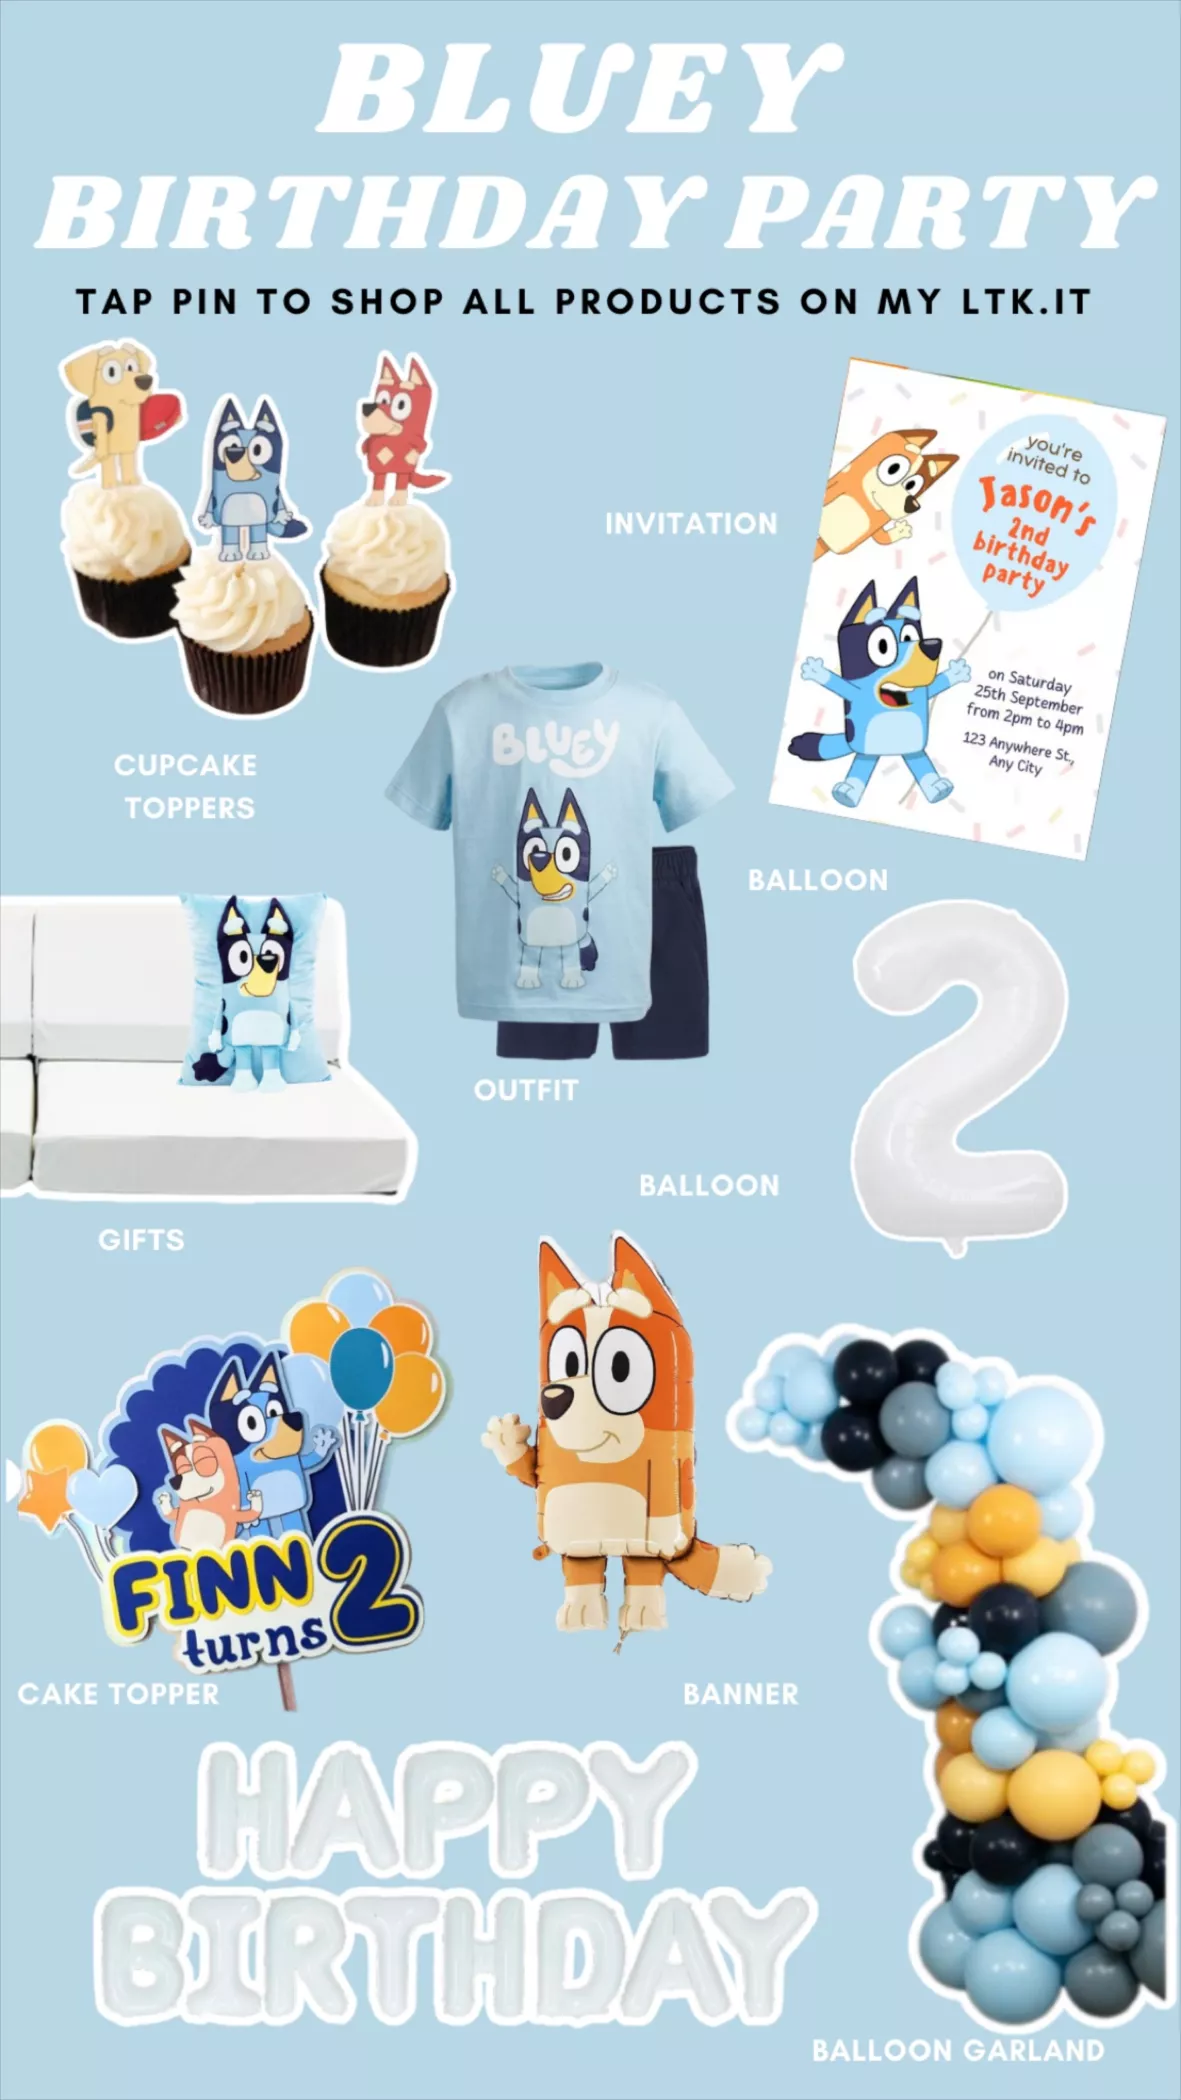 Bluey themed party ideas  2nd birthday party themes, 2nd birthday